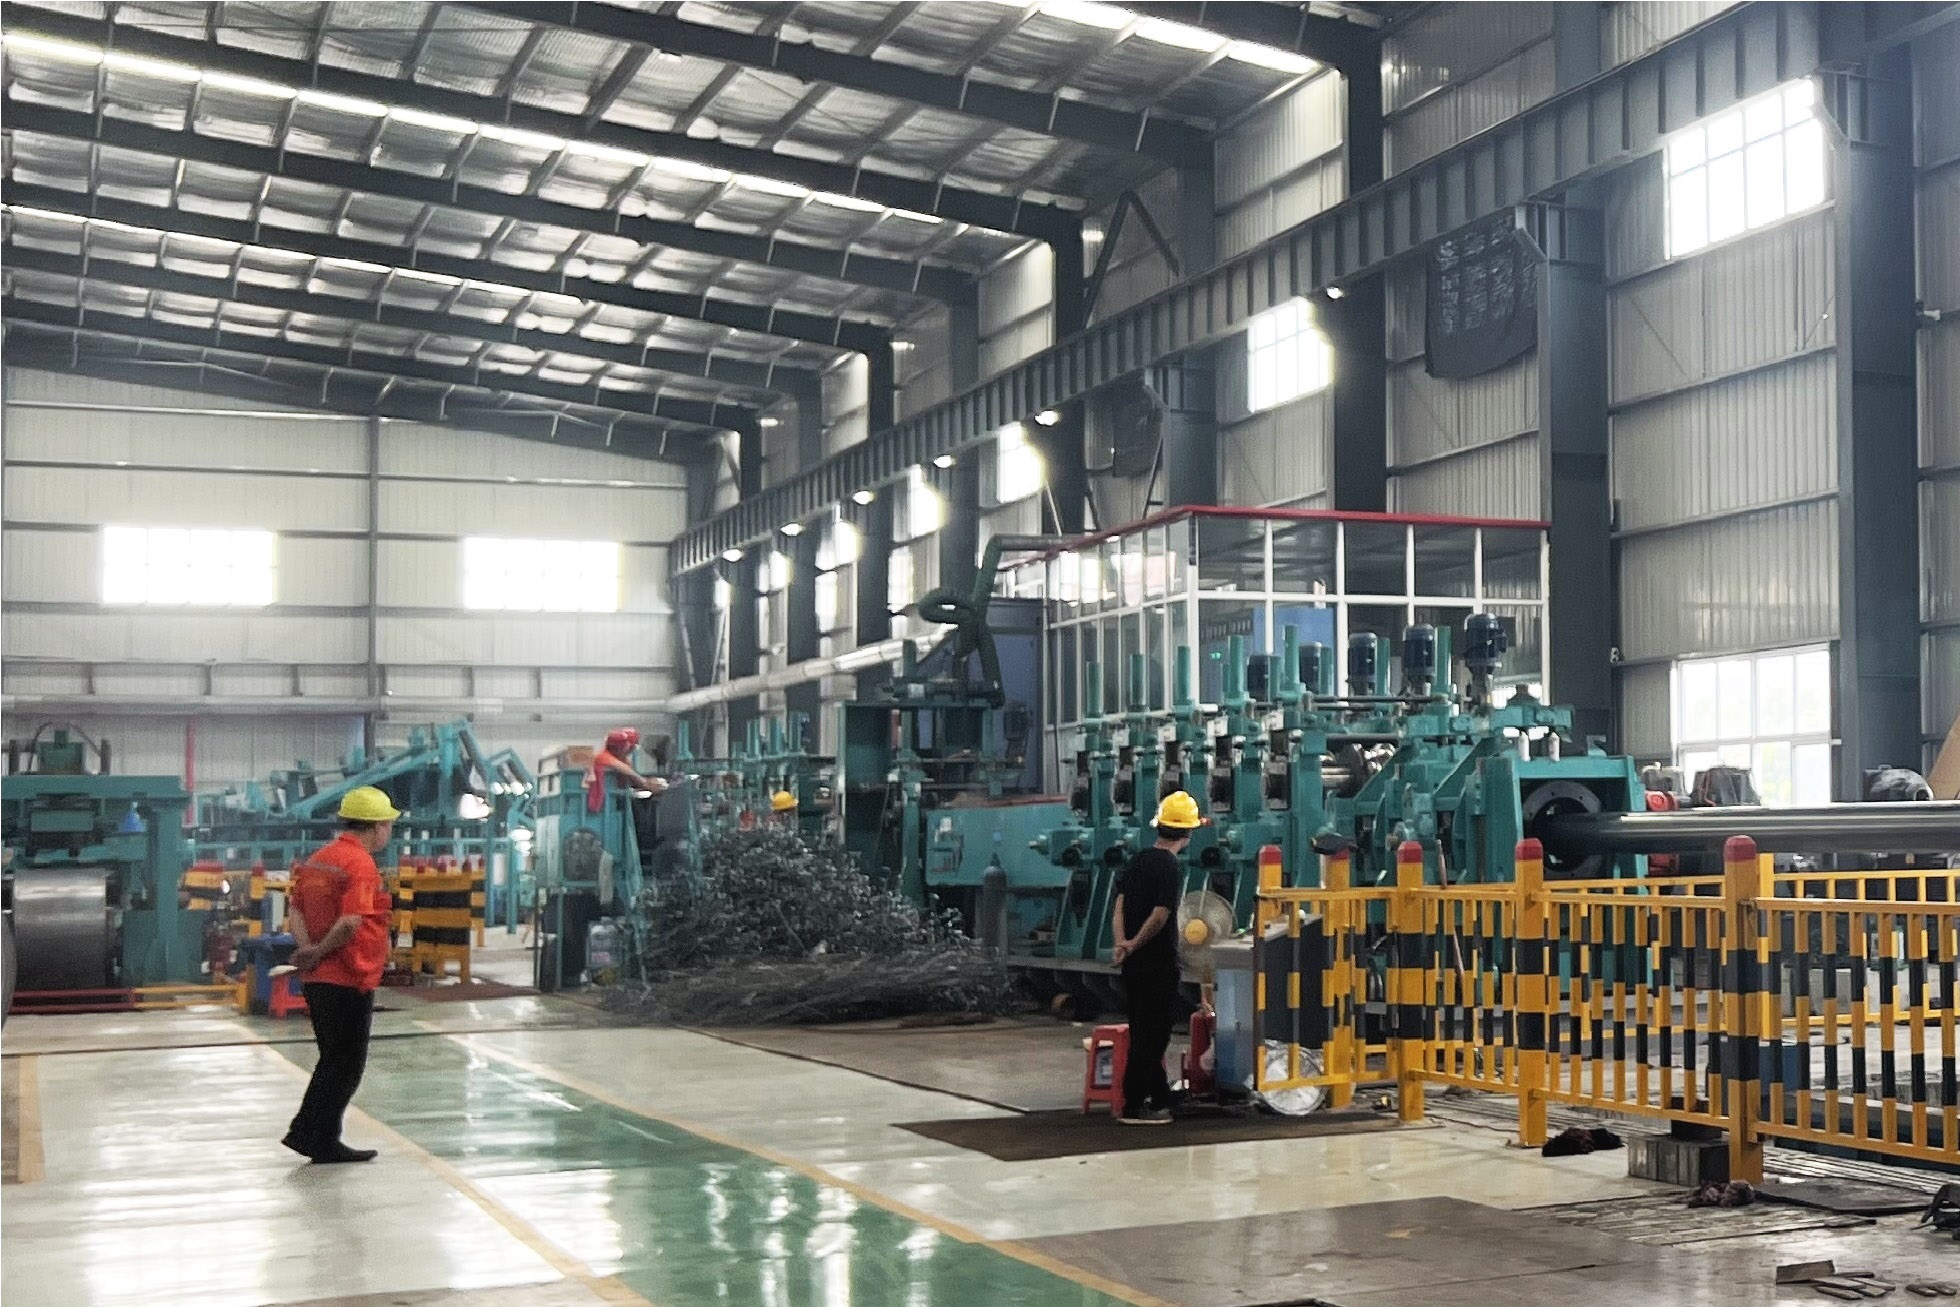 WHFW426*12mm pipe mill has been successfully put into production